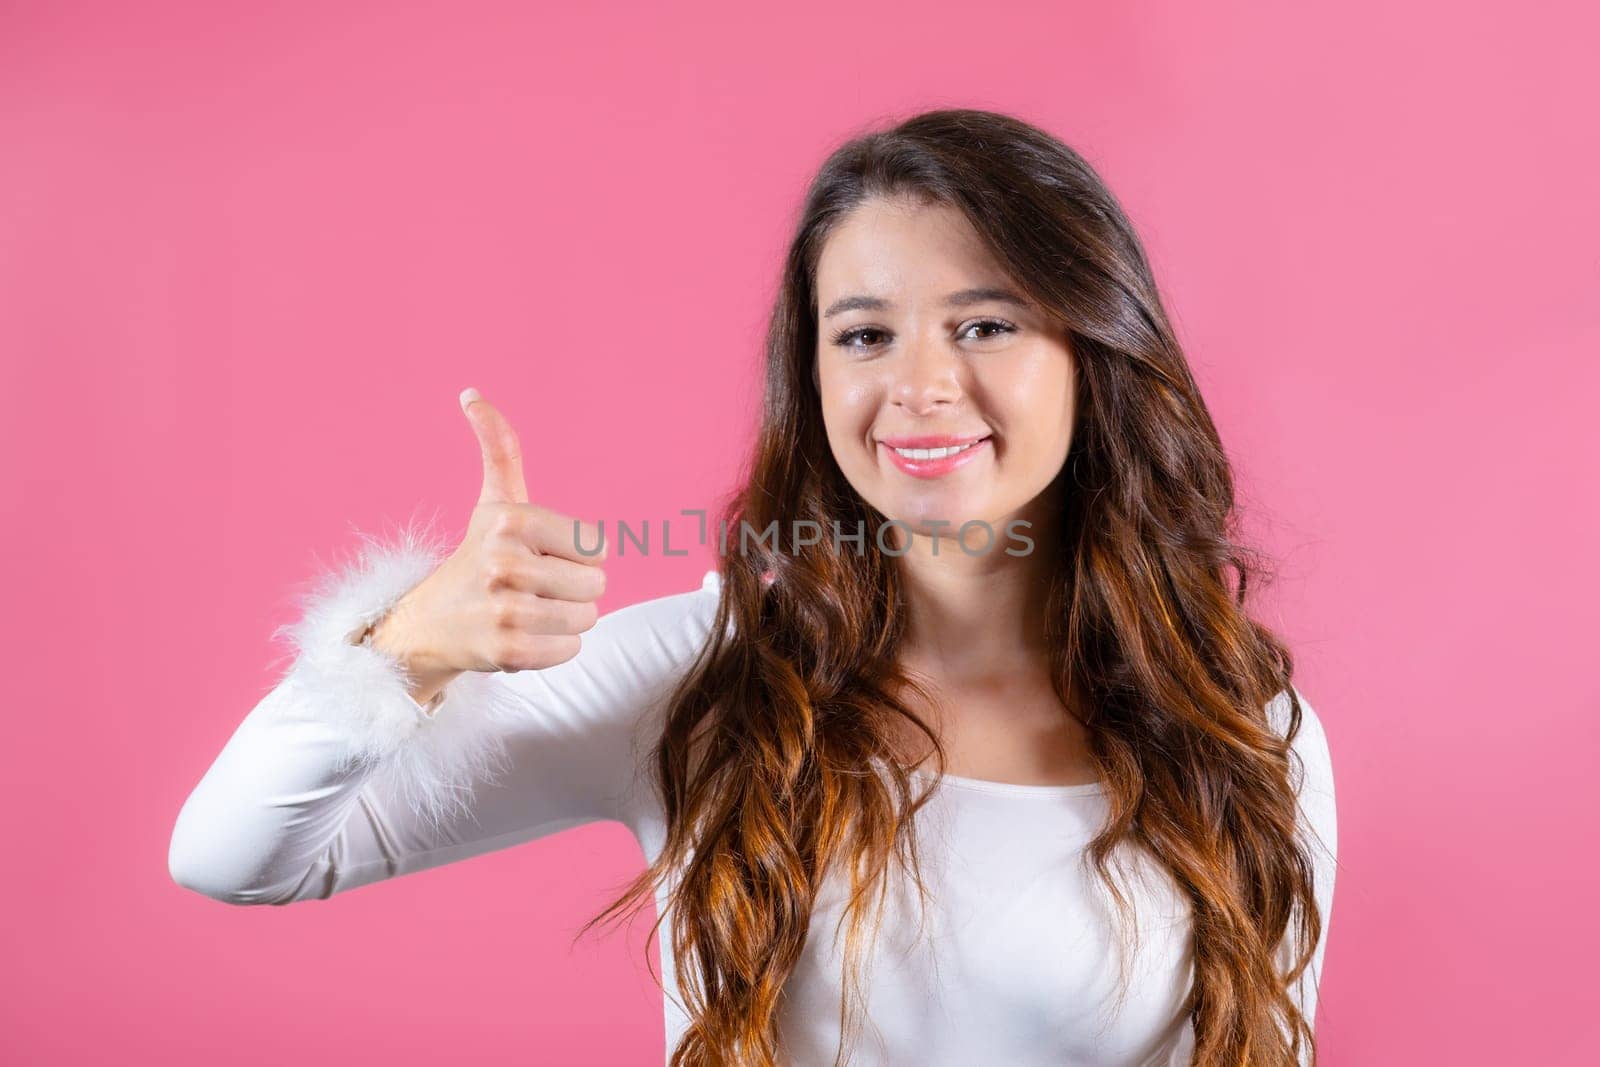 Portrait of brunette female student with a broad smile and showing thumbs up on the pink background